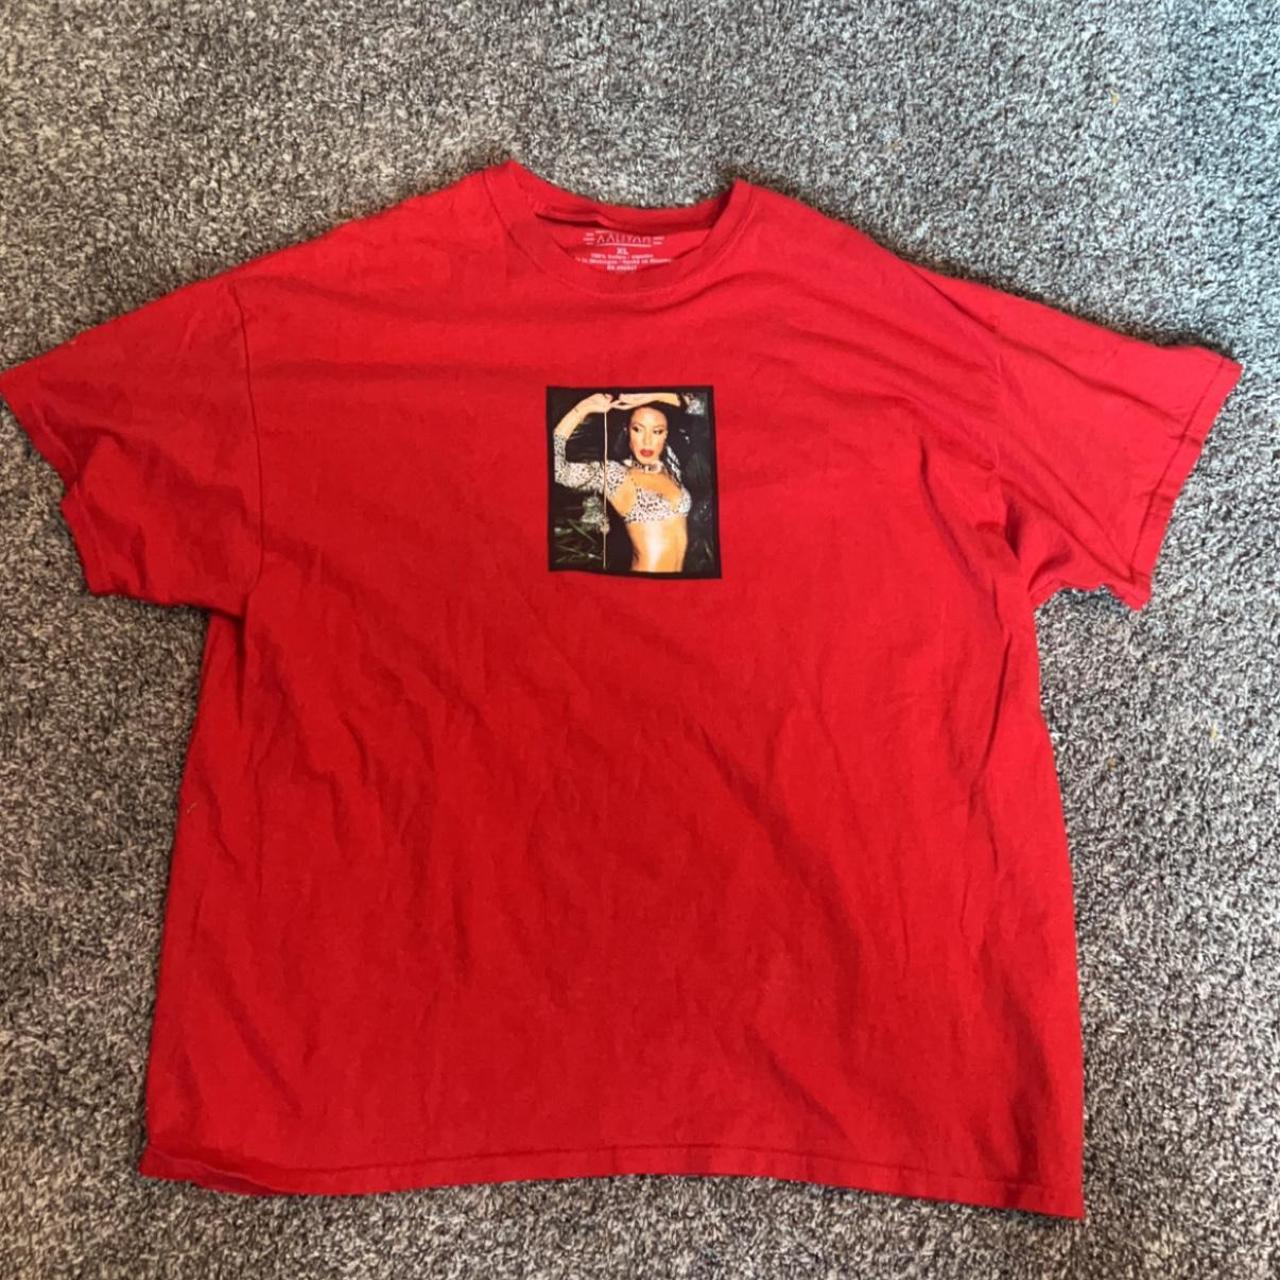 Alife Men's Red and Black T-shirt